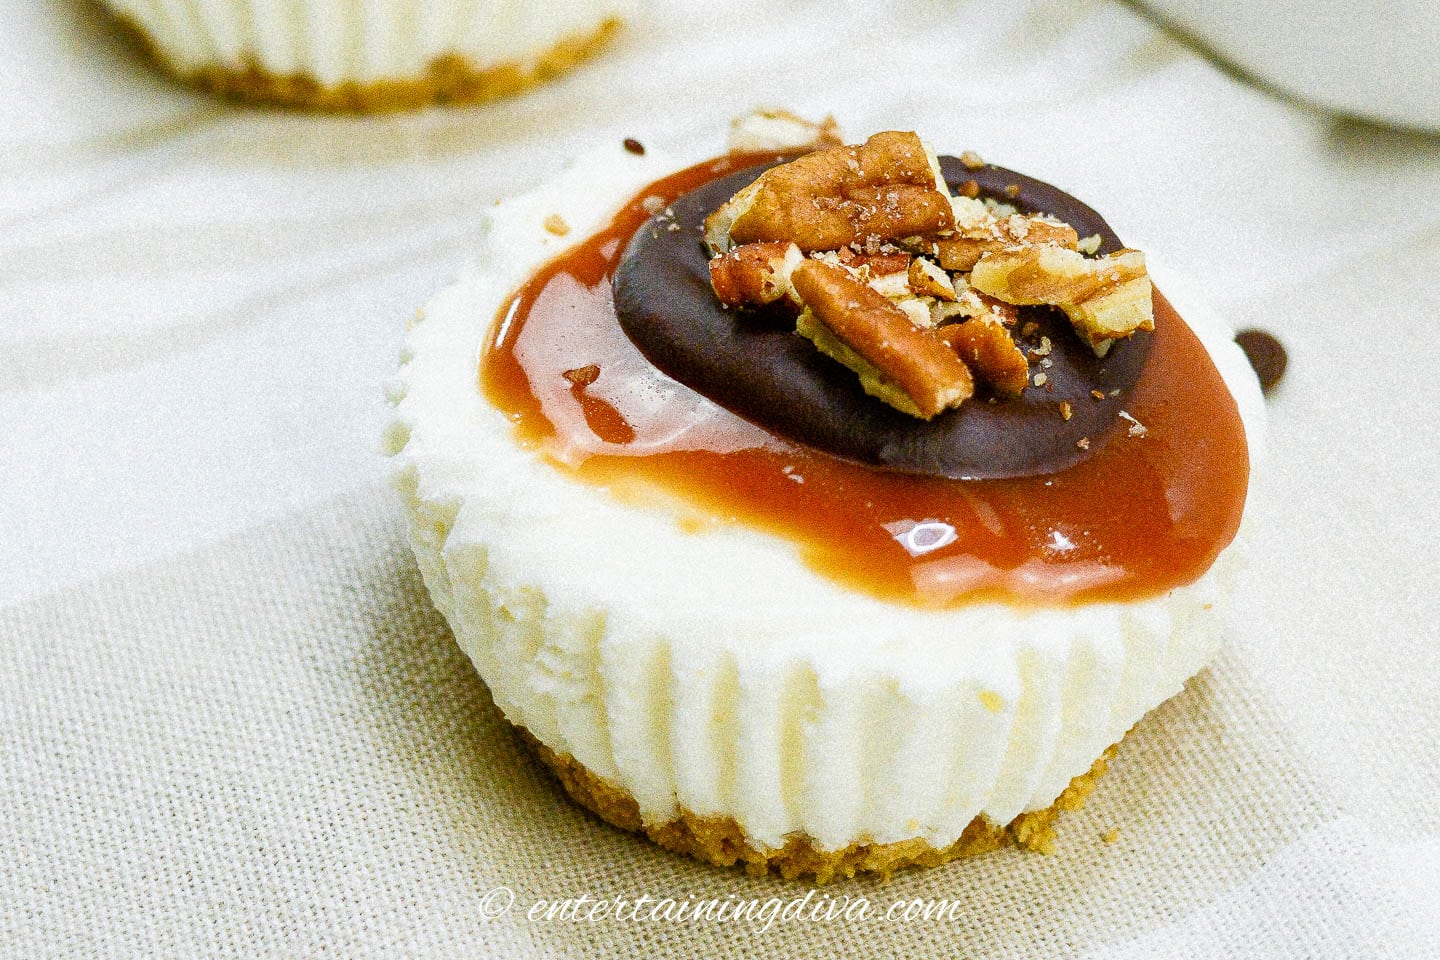 Mini cheesecakes topped with caramel, chocolate and pecans.